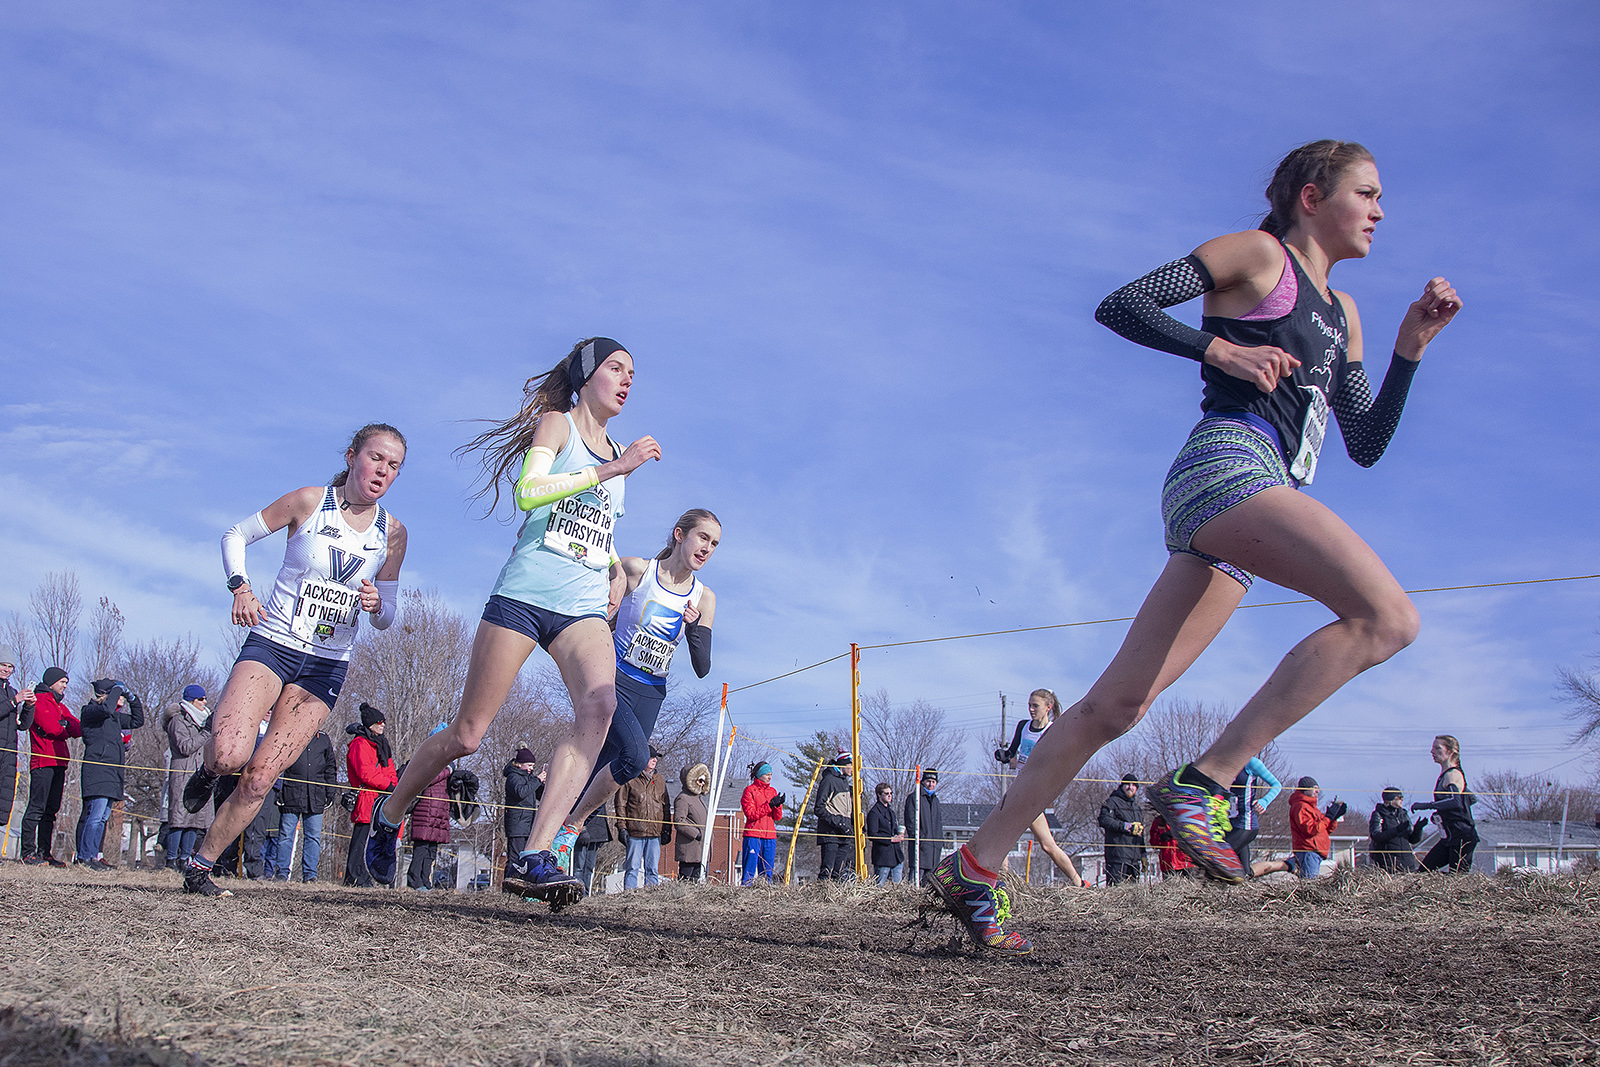 Athletics Canada 2018 XC Championships the moment is captured photography